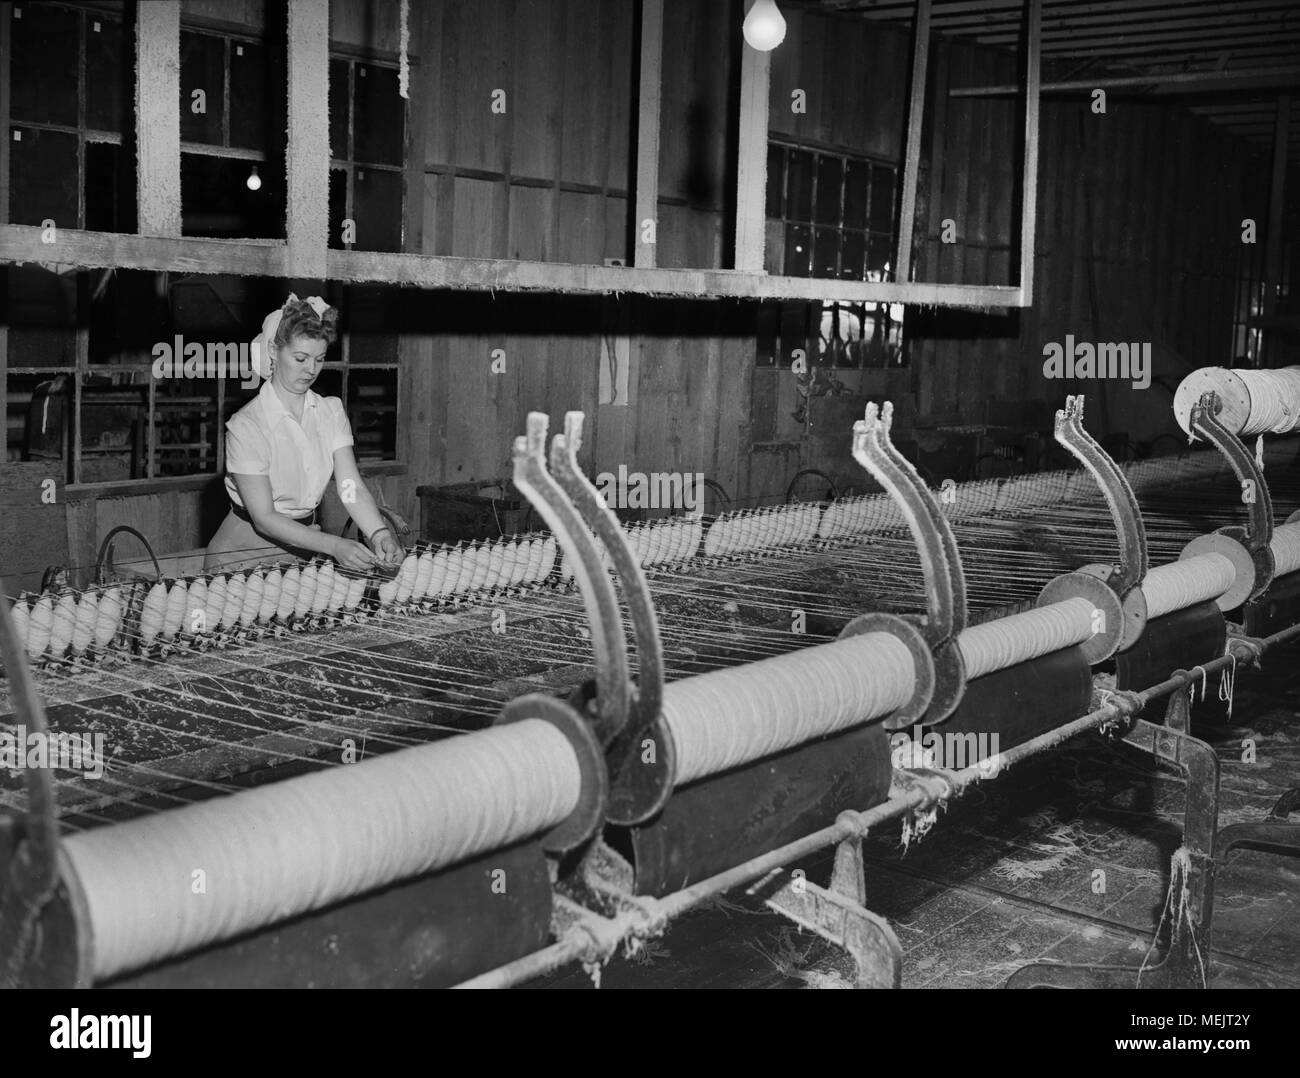 A worker watches an early industrial plastic manufacturing process in a California factory, ca. 1946. Stock Photo